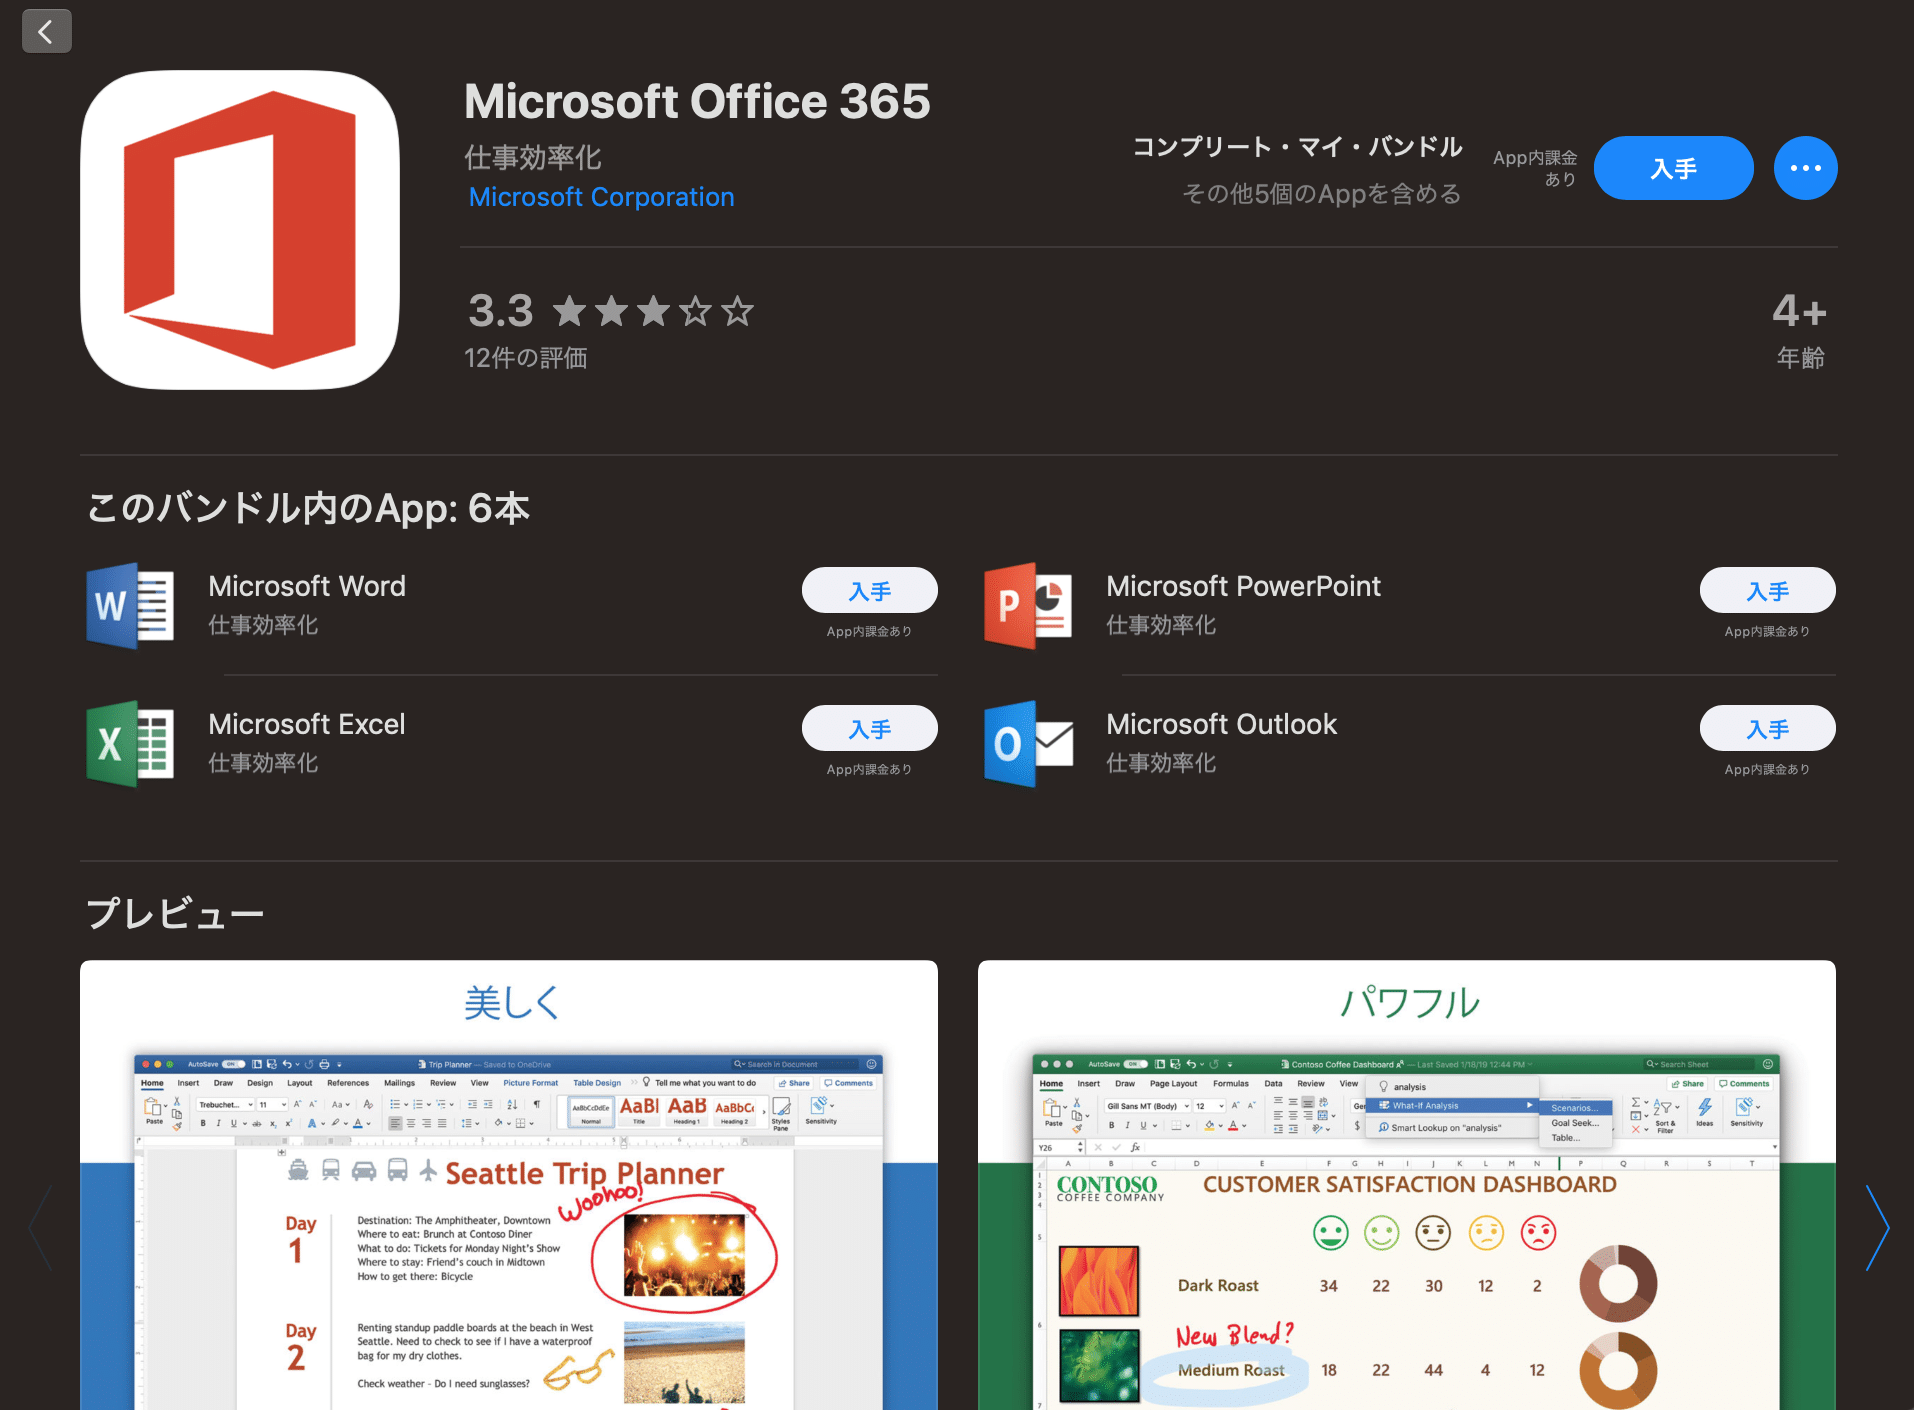 office365.png